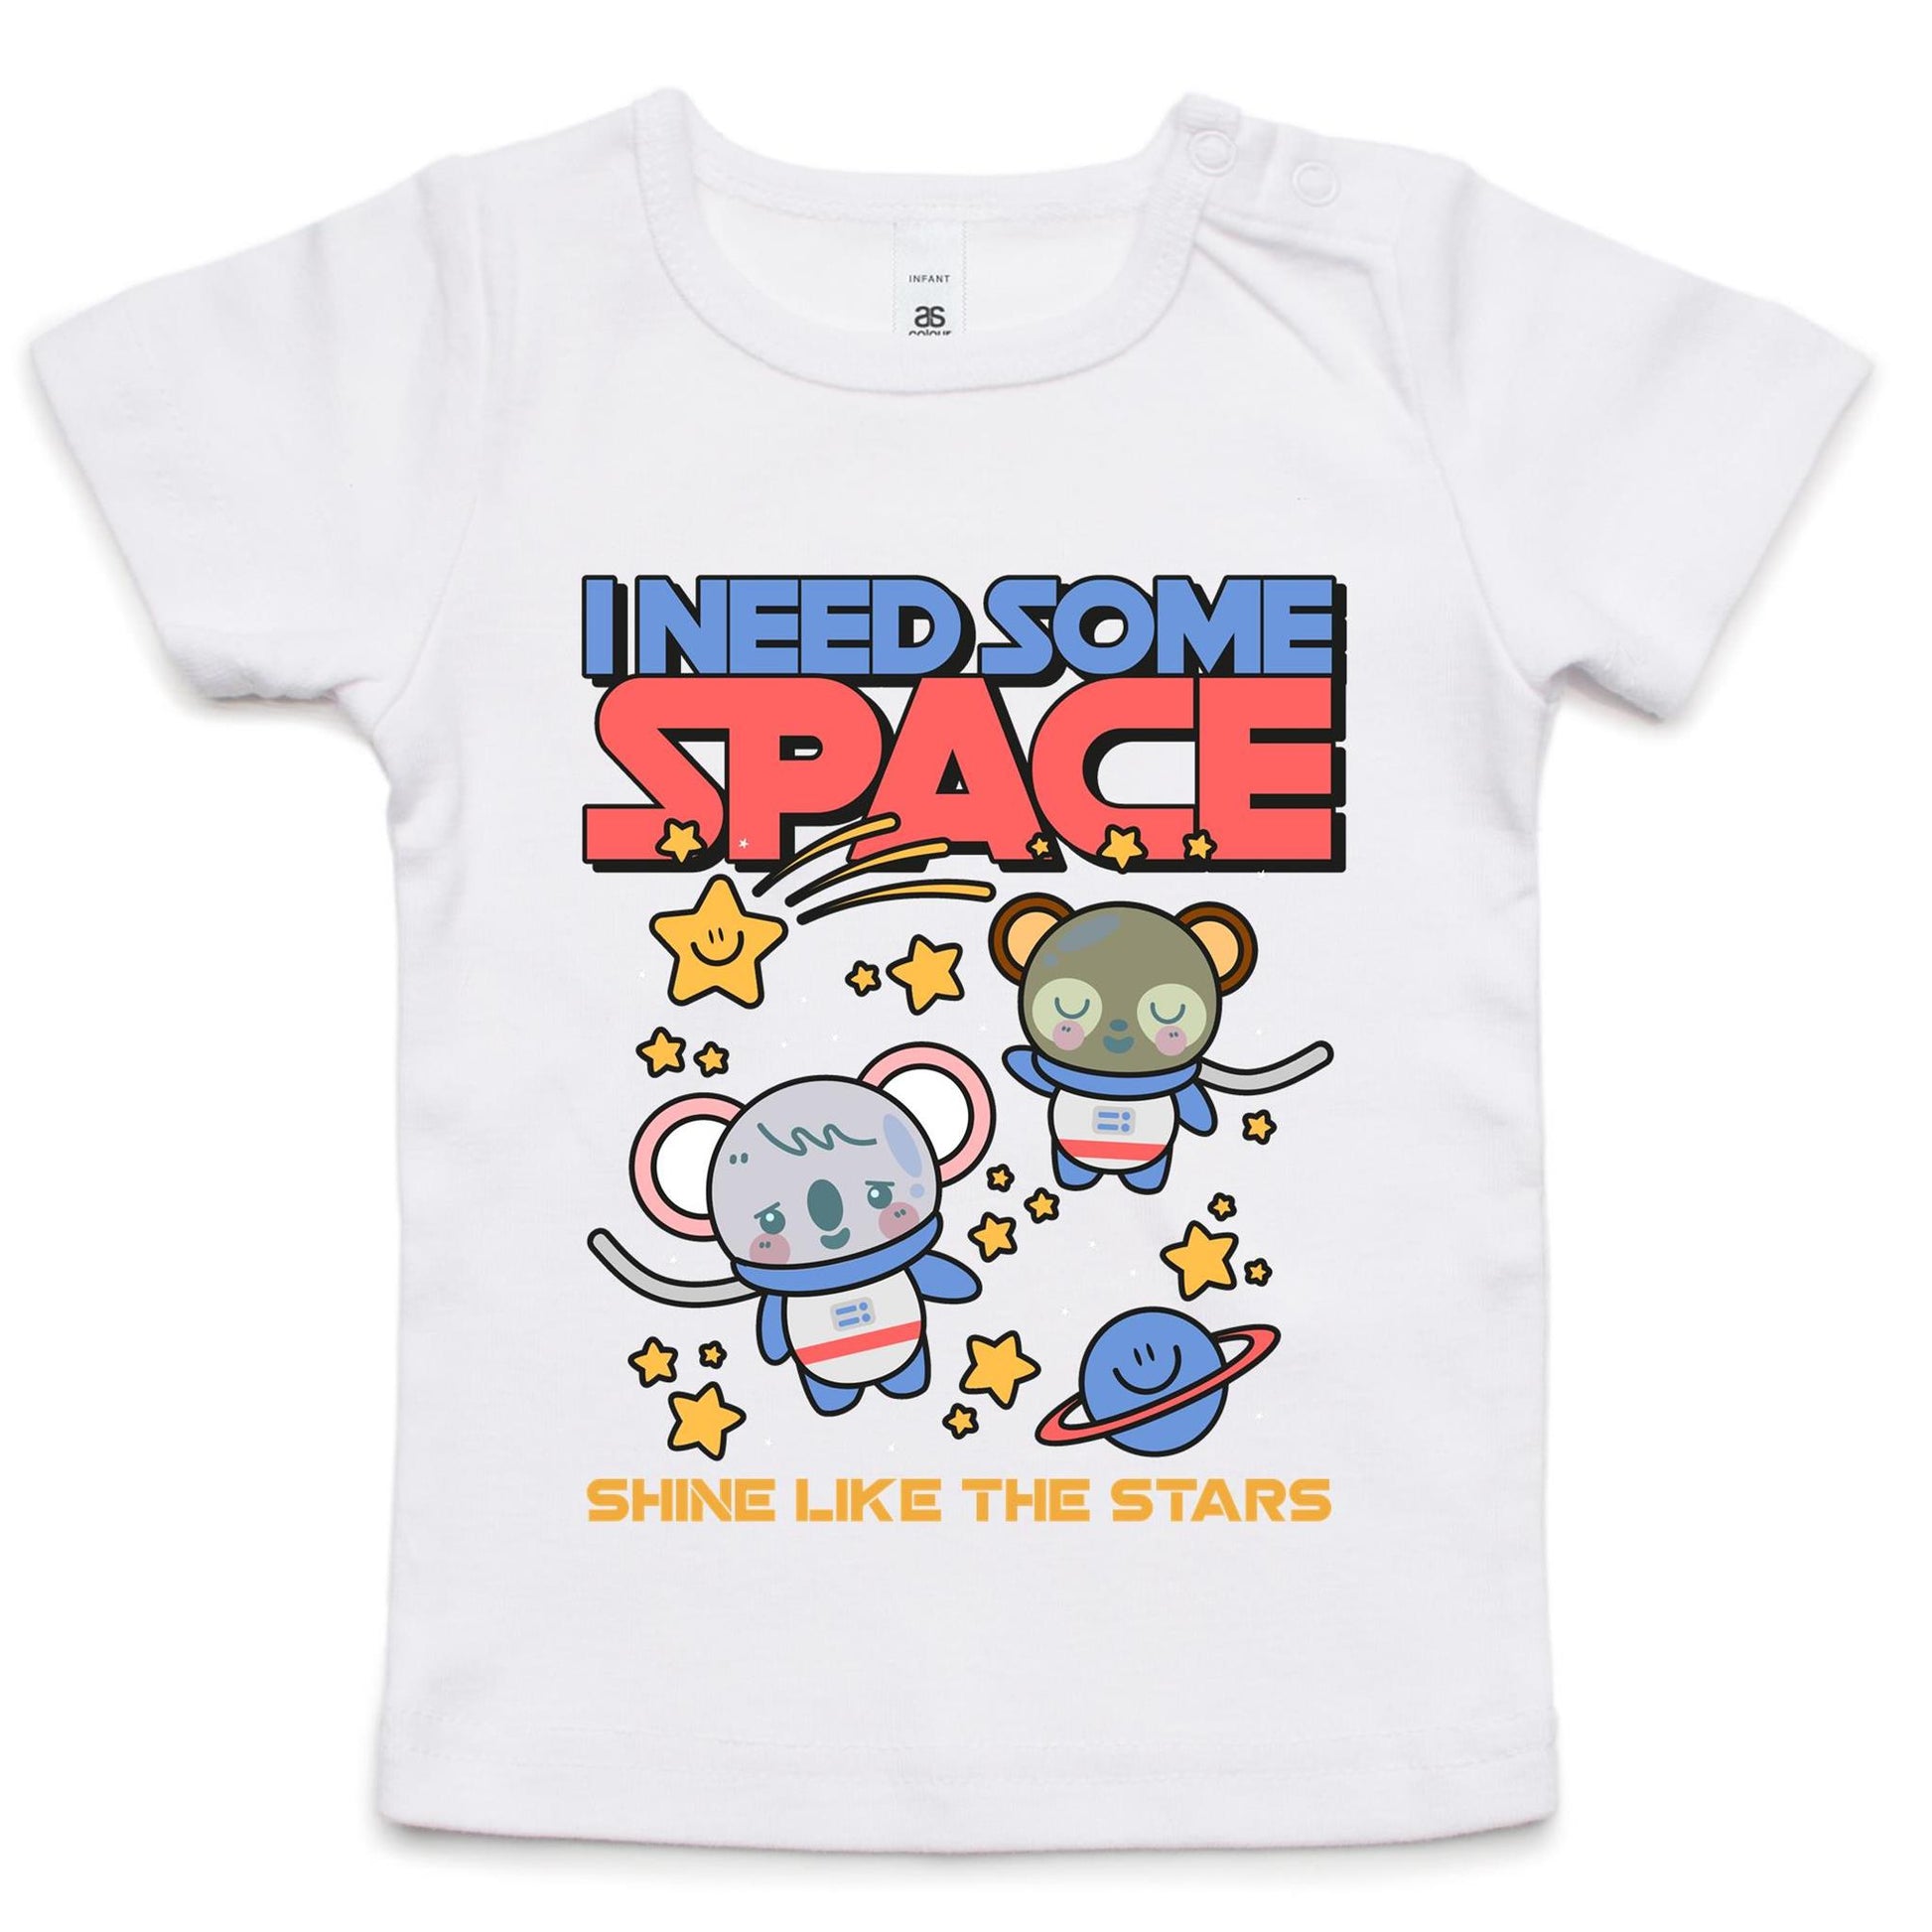 I Need Some Space - Baby T-shirt White Baby T-shirt Space